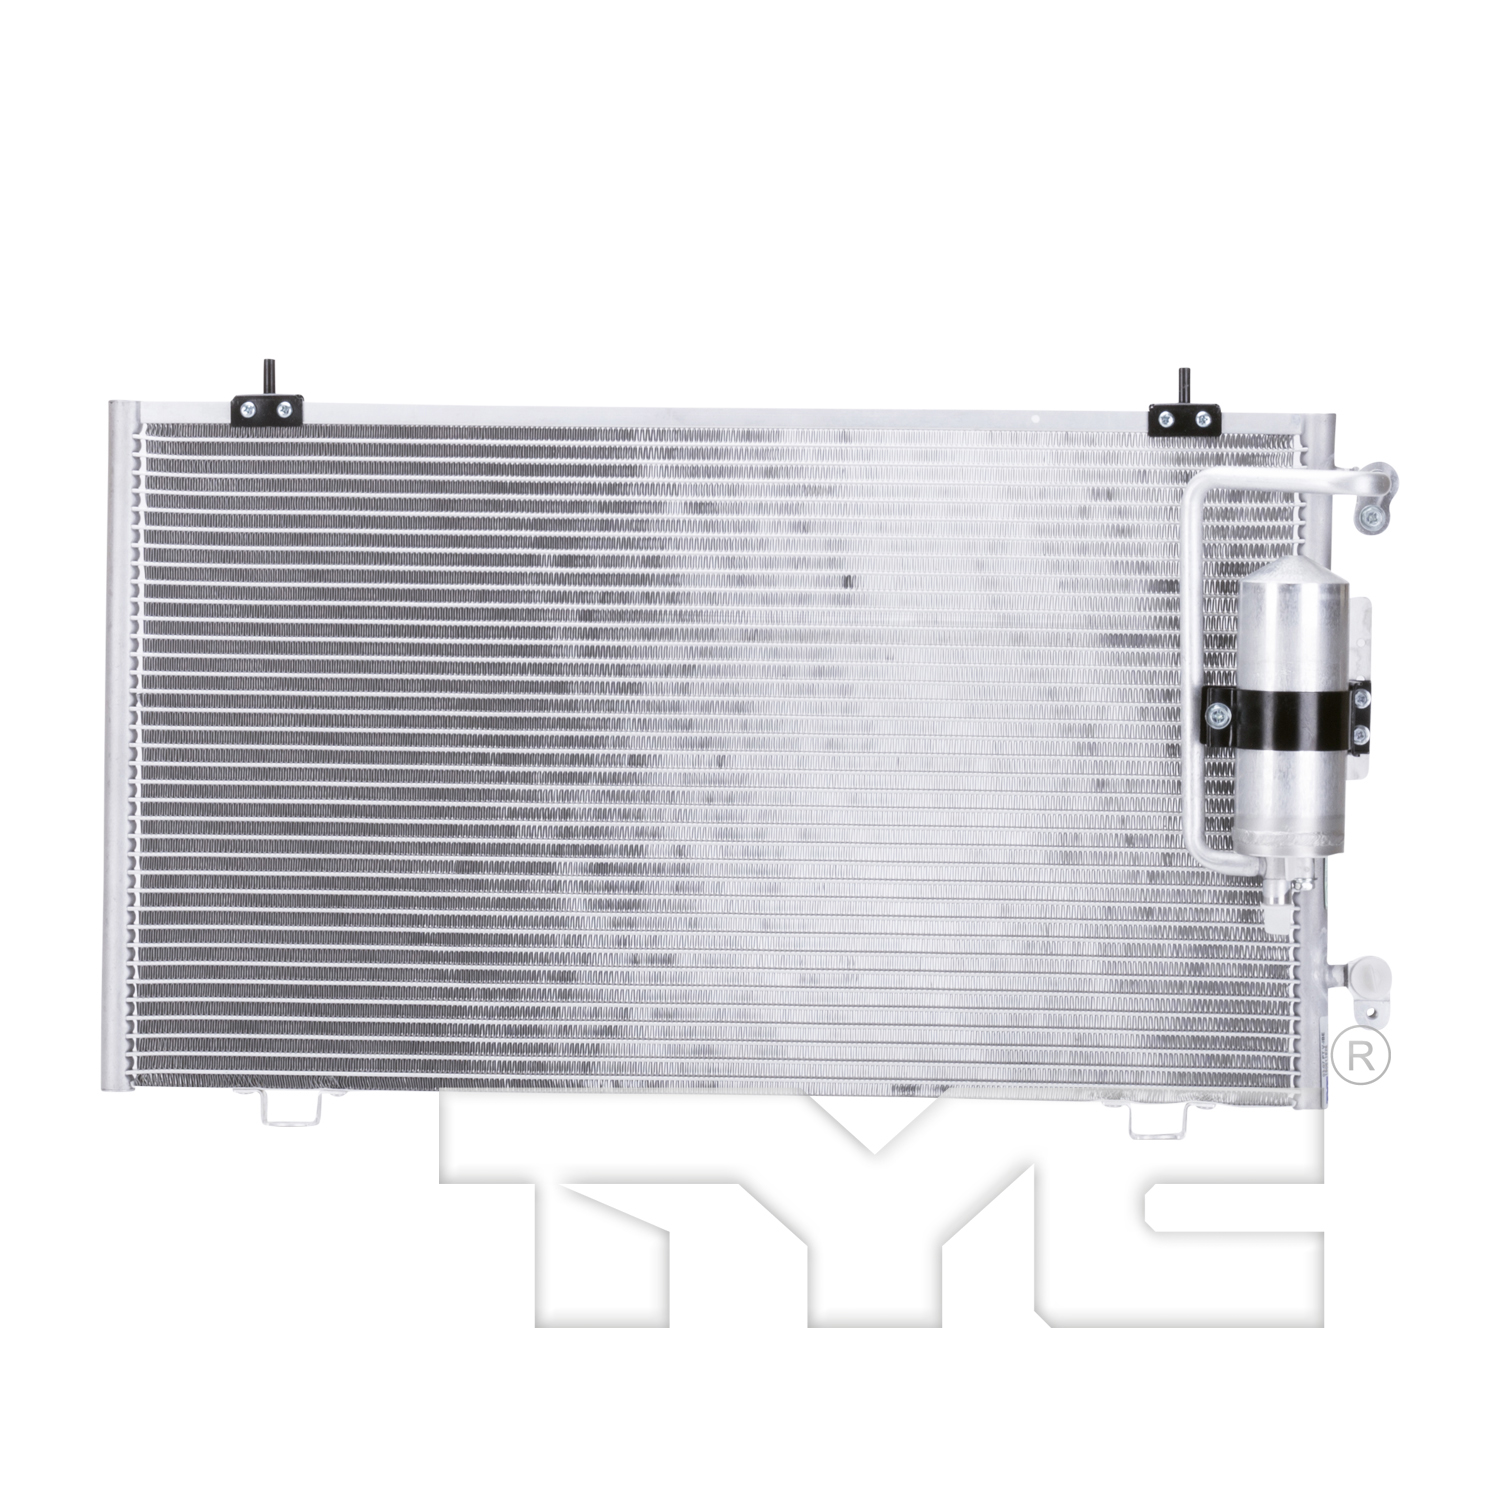 Aftermarket AC CONDENSERS for PONTIAC - VIBE, VIBE,03-08,Air conditioning condenser